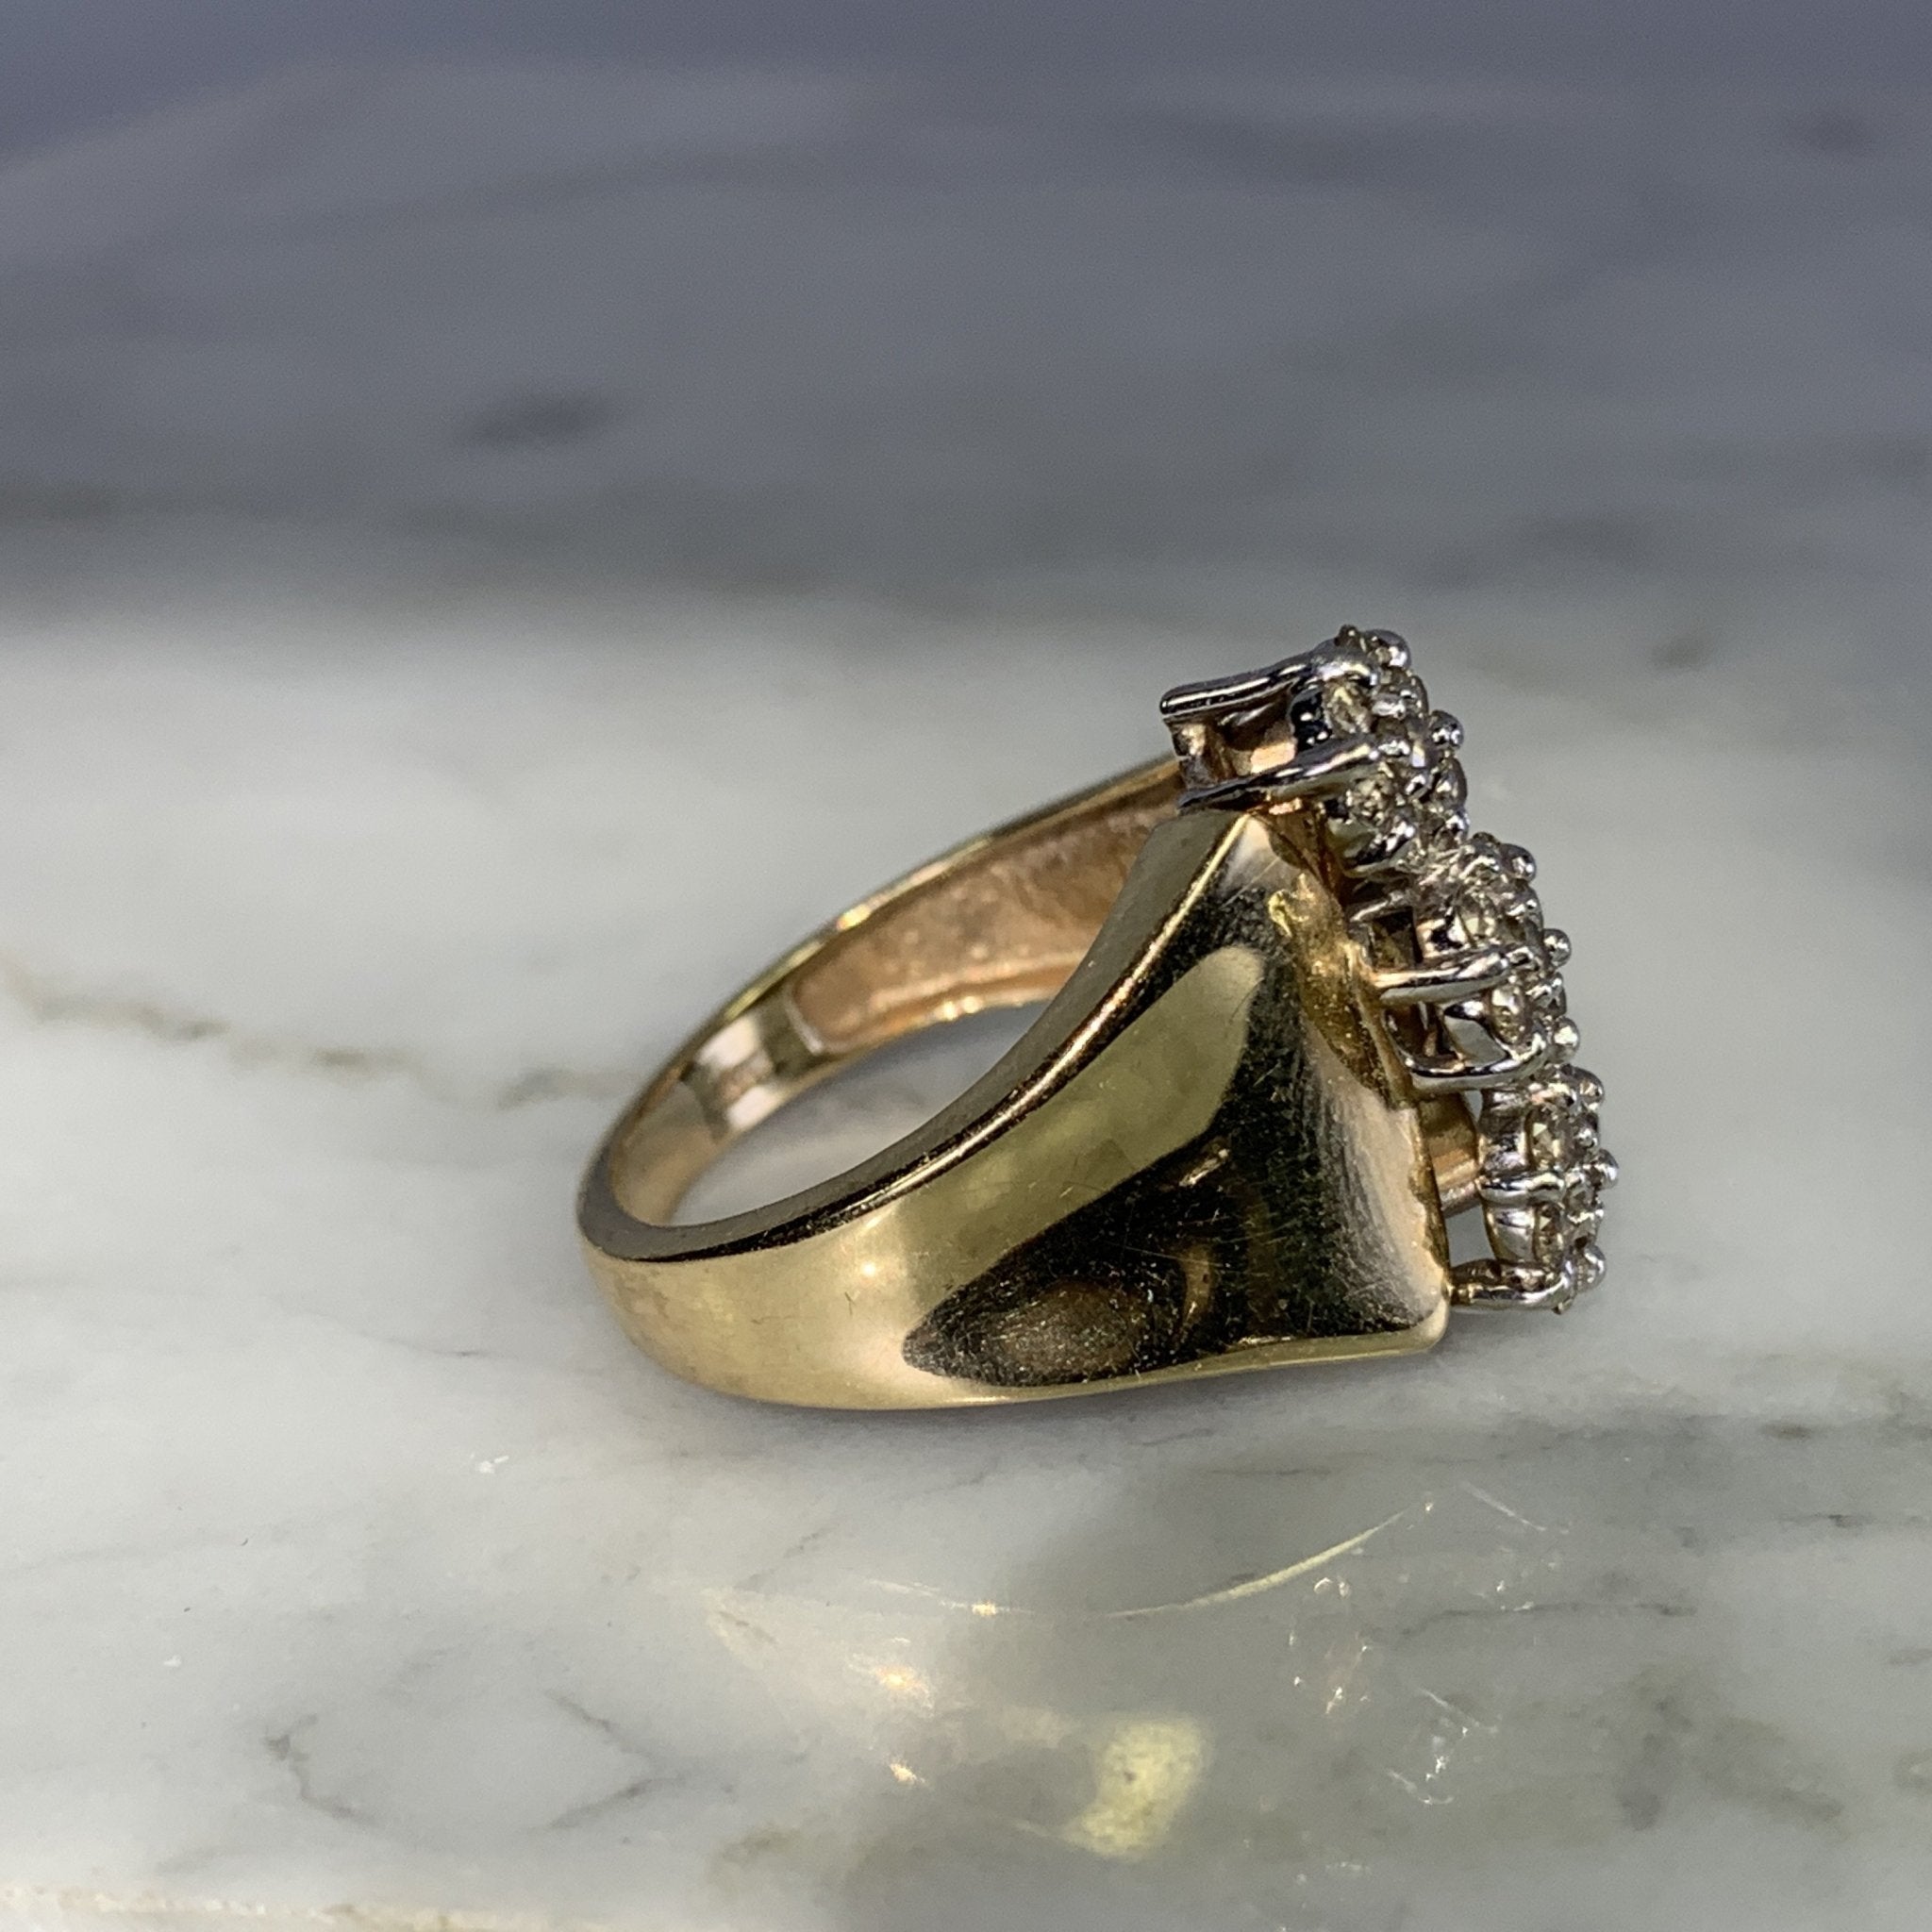 1970s Vintage Diamond Cluster Statement Ring in a 10K Yellow Gold Sett